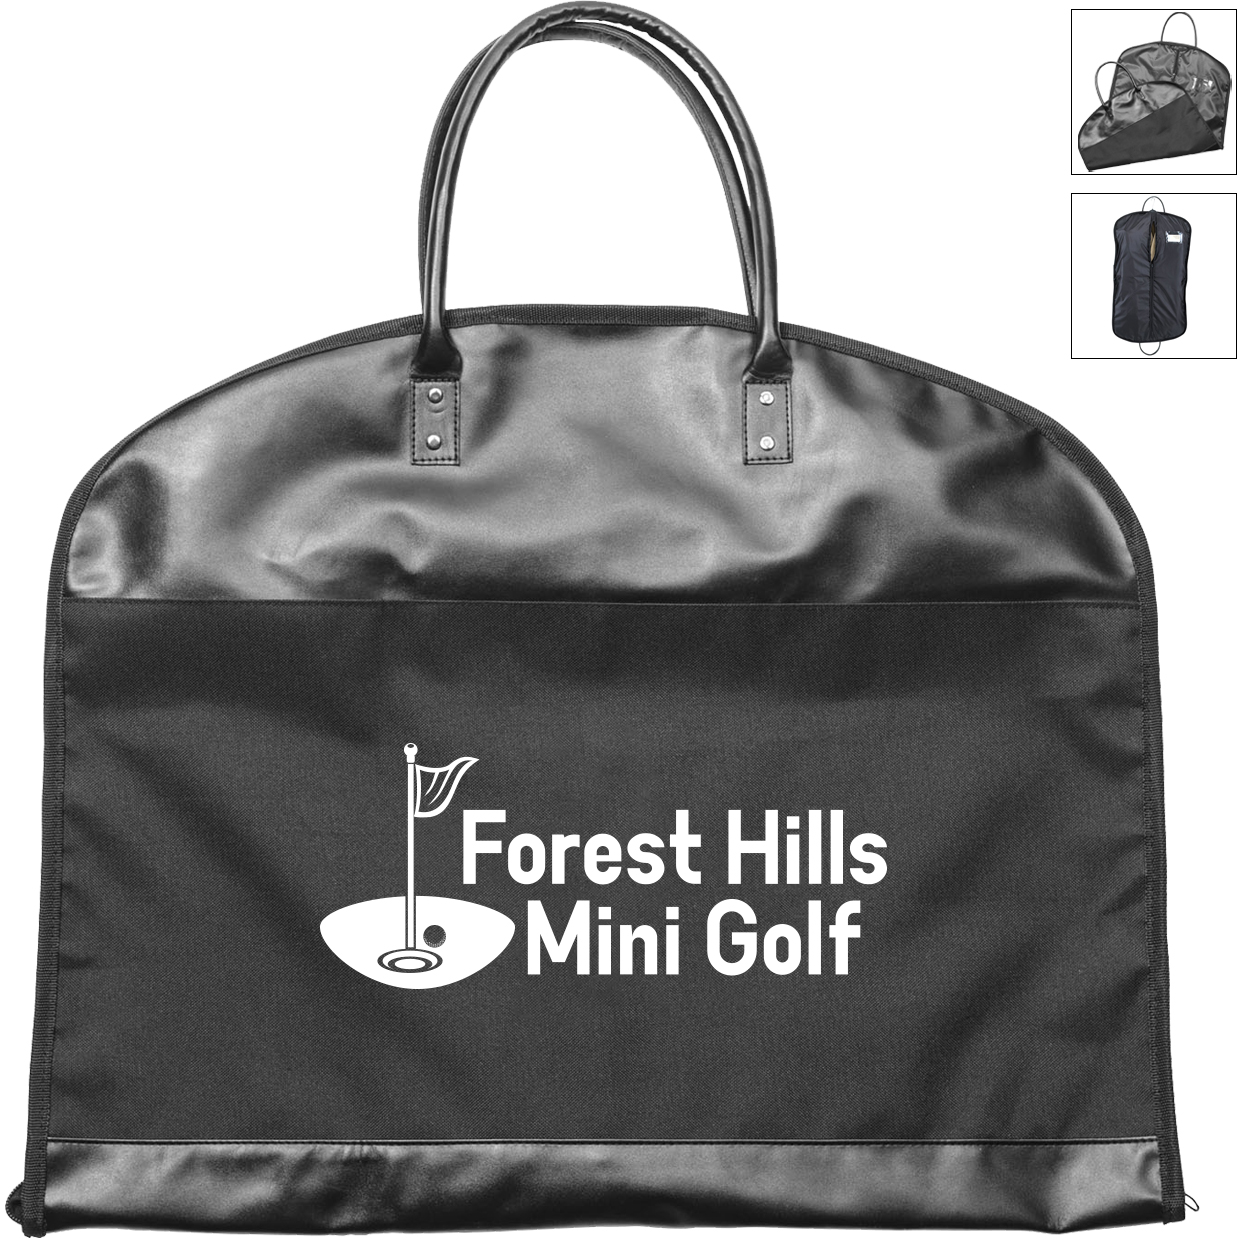 Laundry Bags, Garment & Shoe Bags by Business Gifts, Promotional Products, Customized Appreciation Gifts